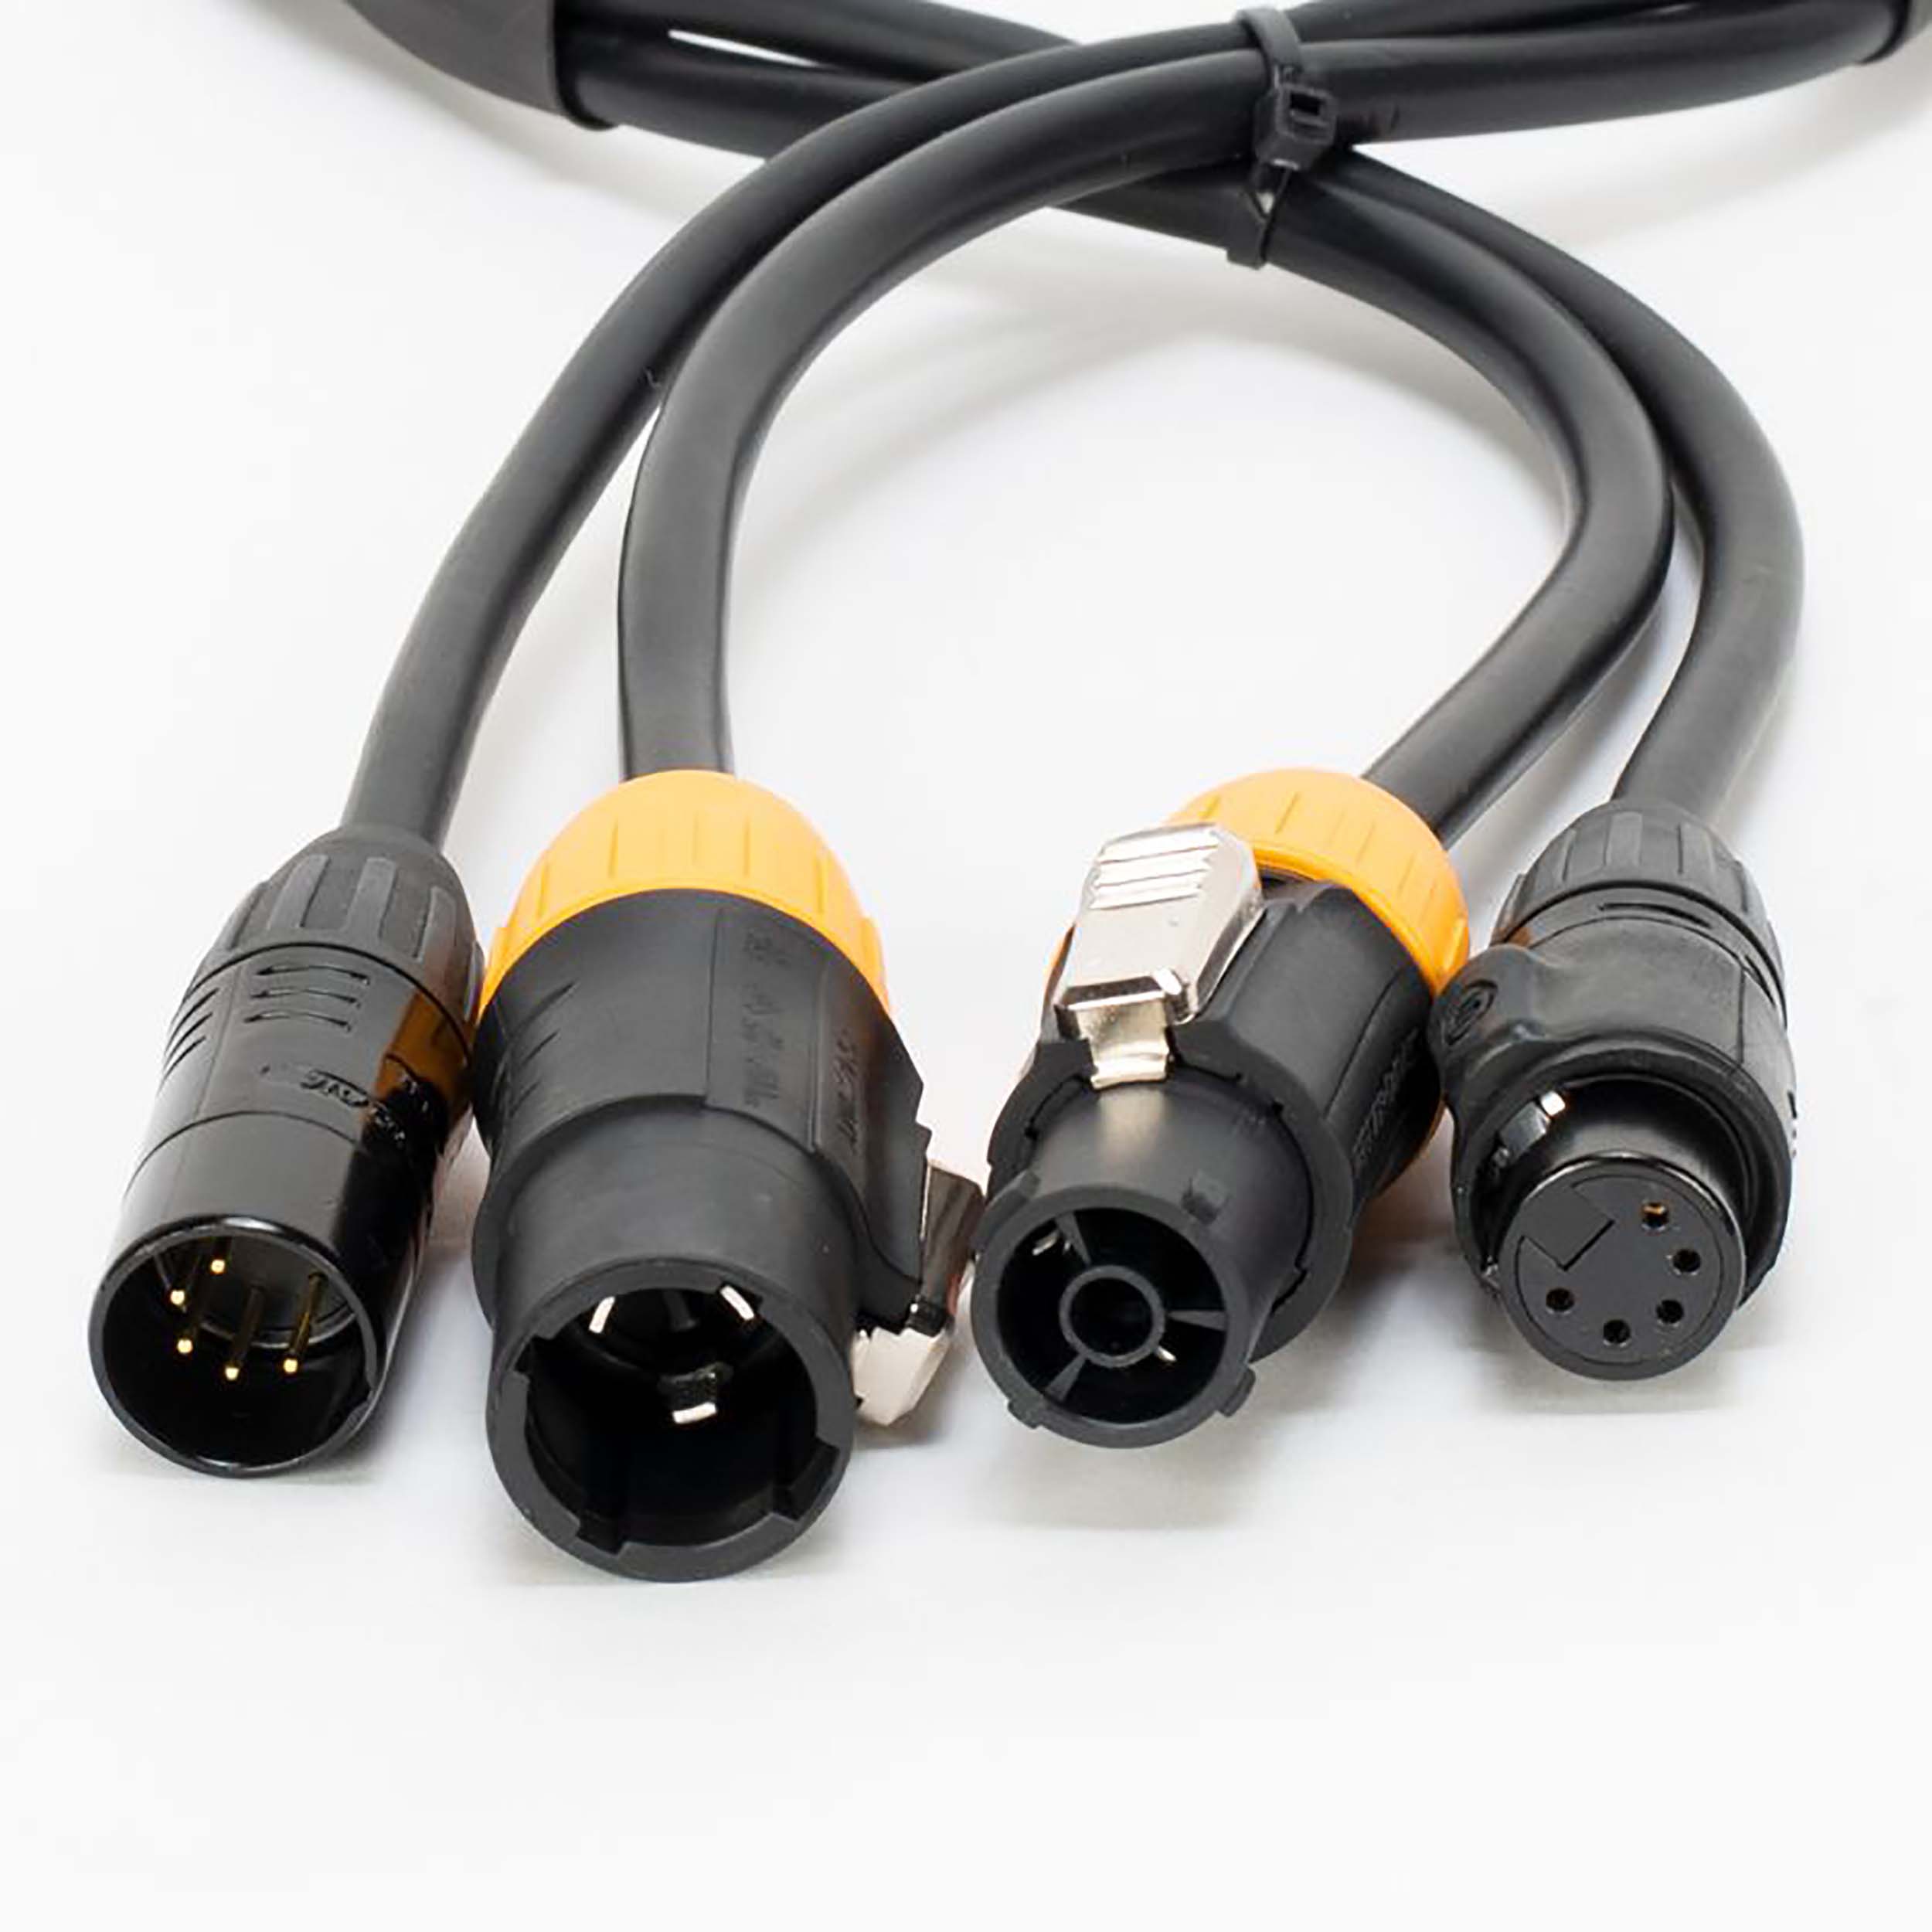 Accu-Cable AC5PTRUE, IP65-Rated 5-Pin DMX & Locking Power Link Combo Cable by Accu Cable